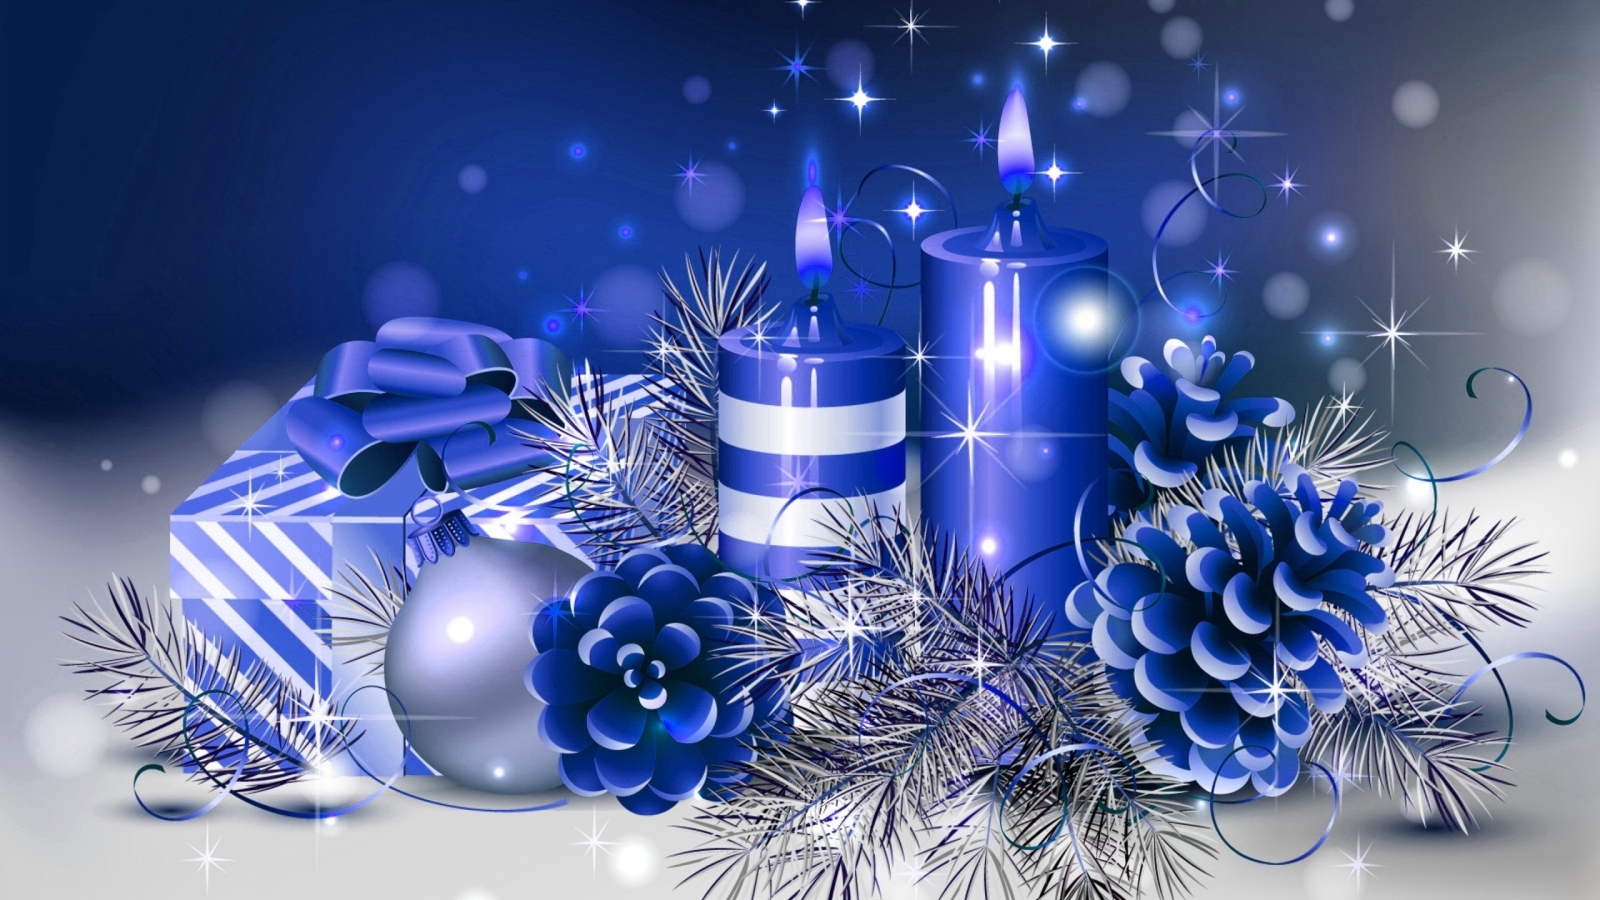 Blue Christmas Wallpaper In Holiday Celebrations